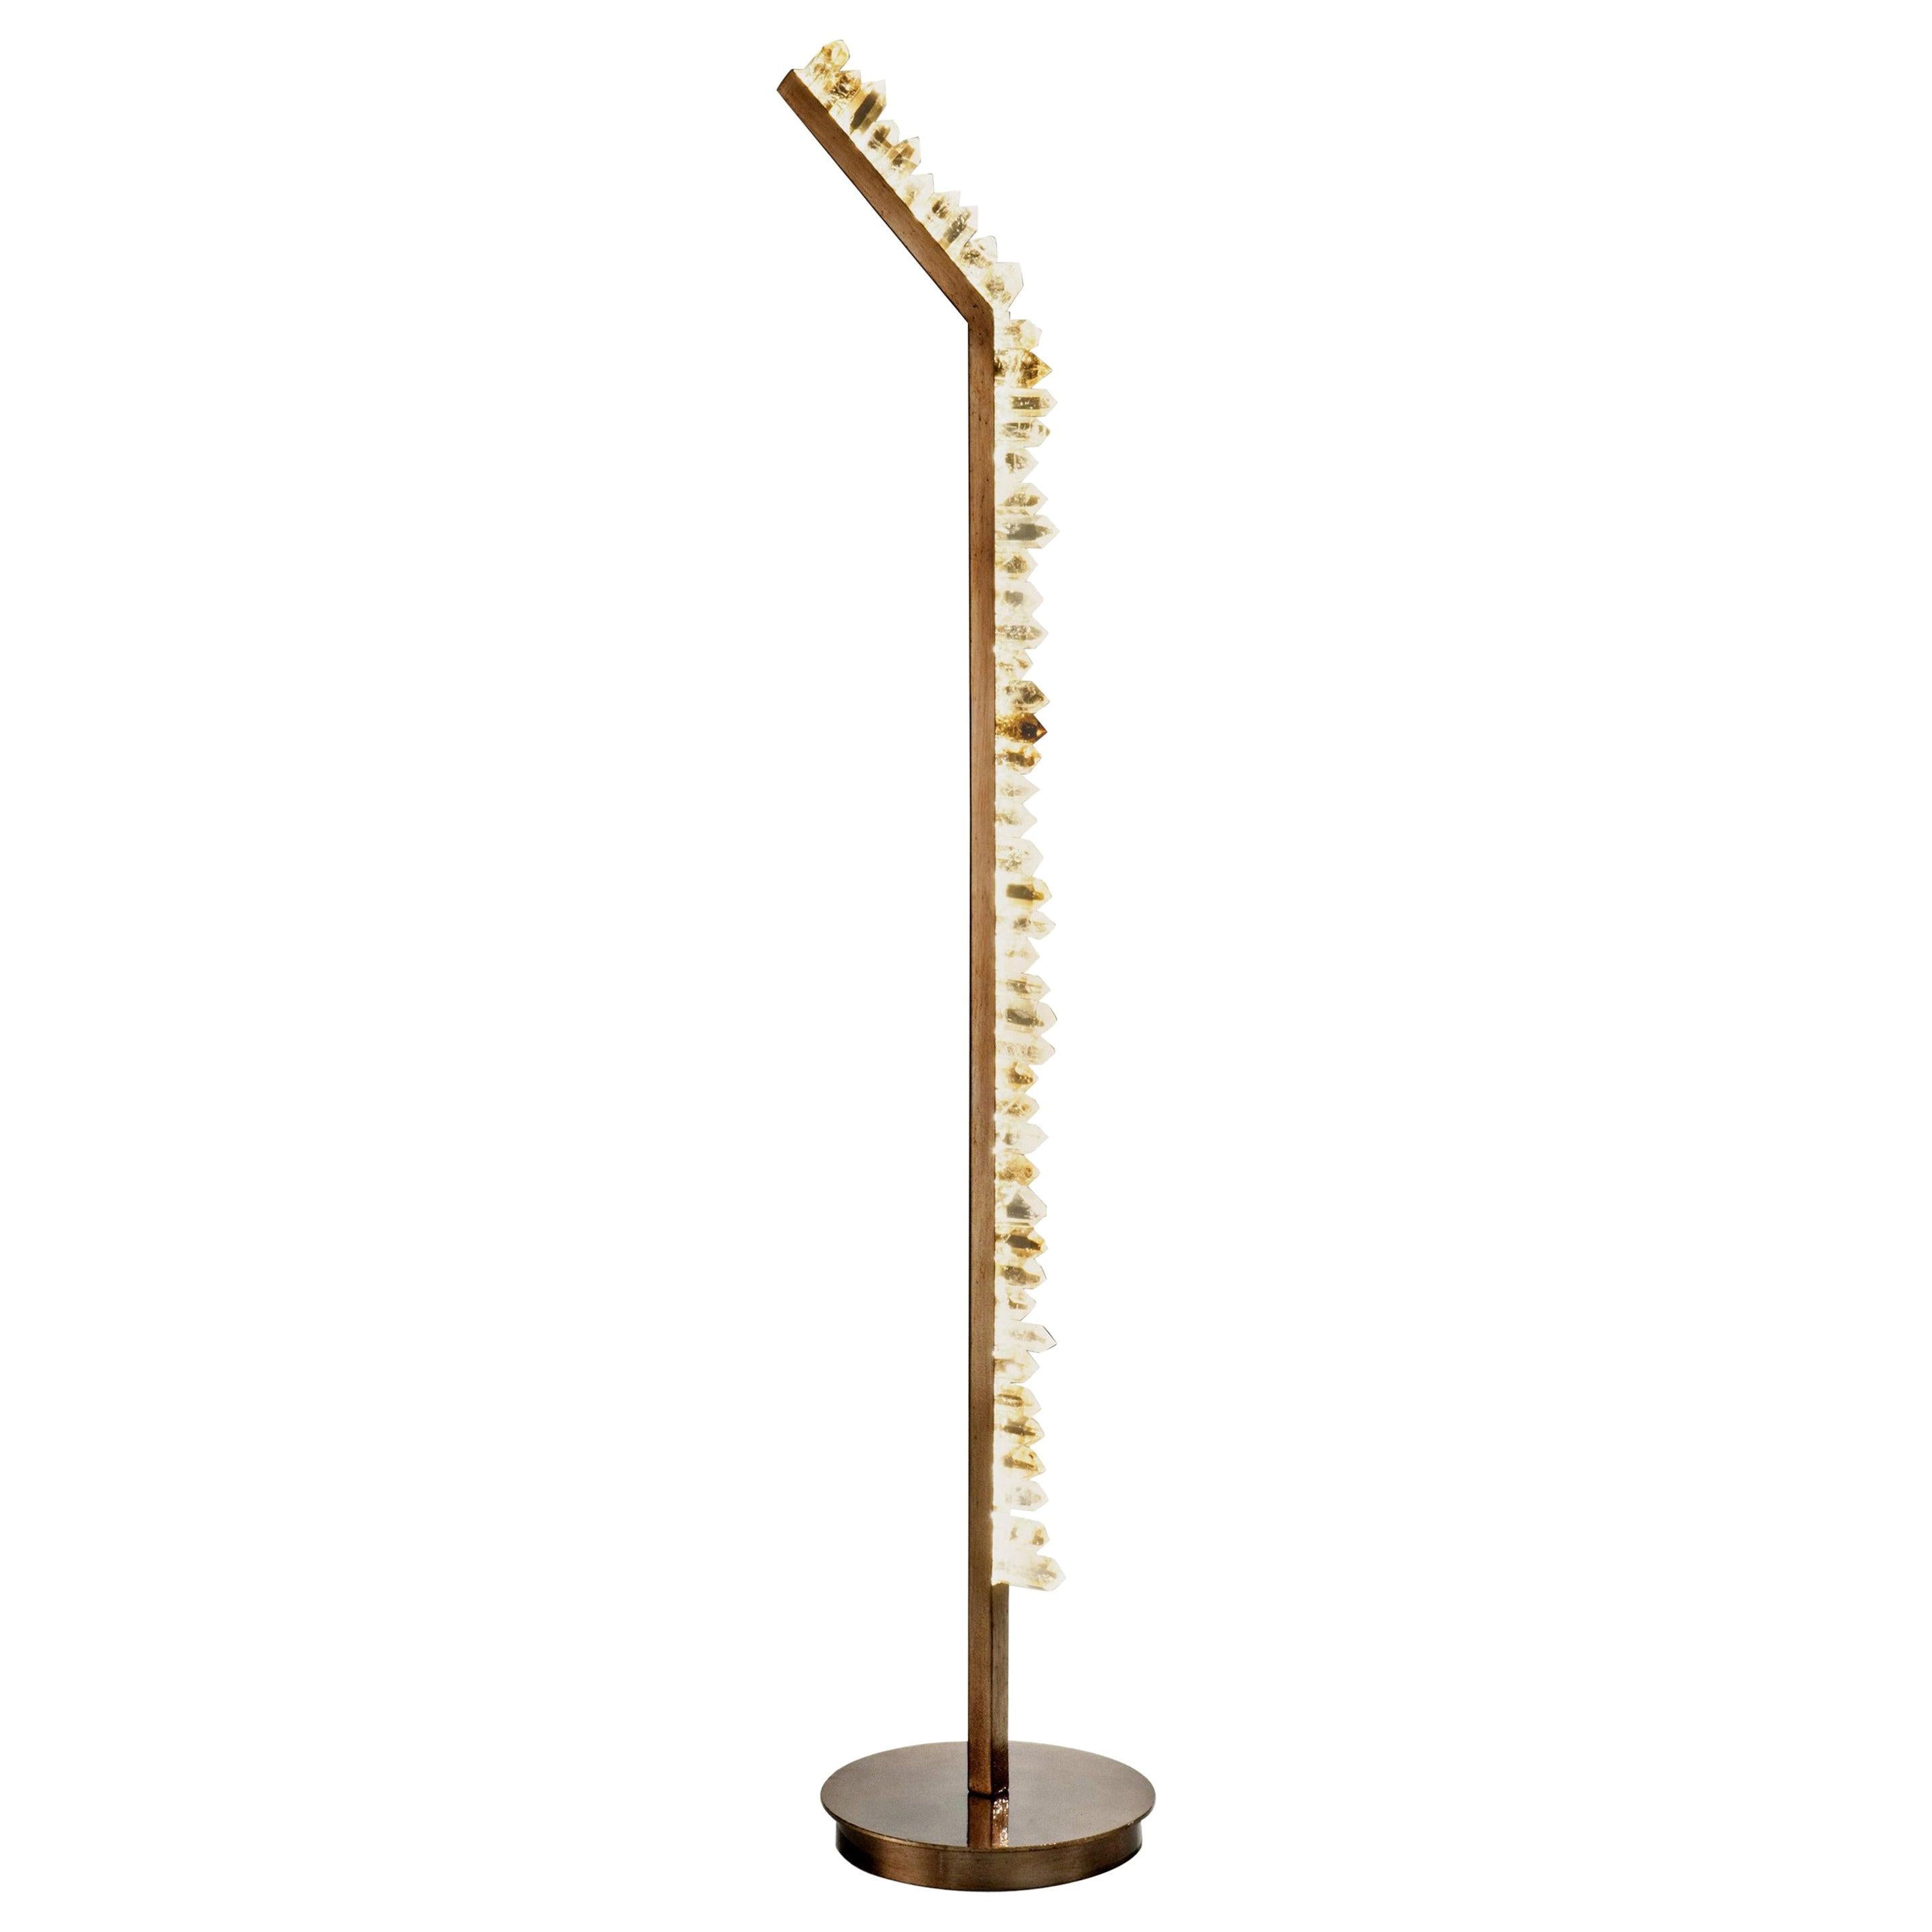 White and Smoked Quartz Floor Lamp by Aver